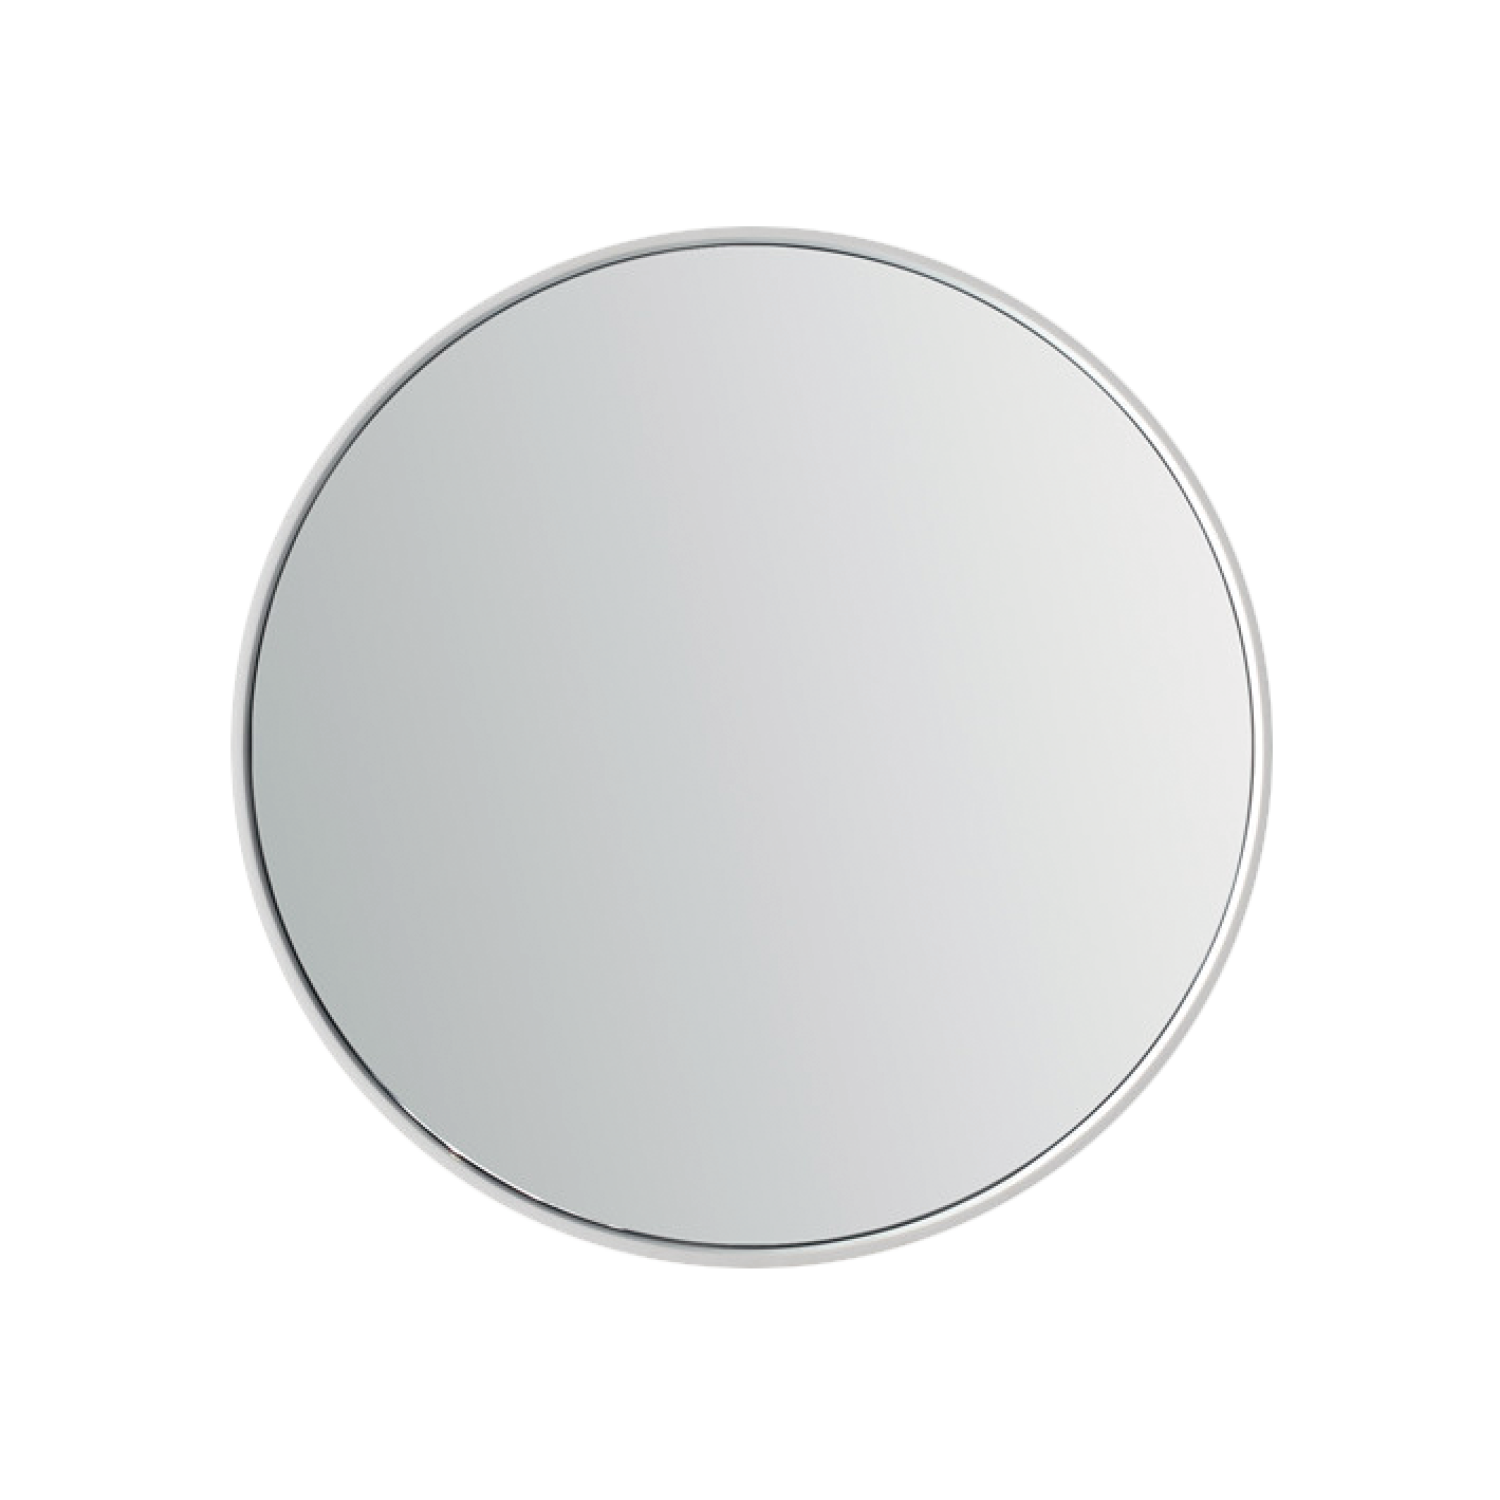 DAX Solid Surface Round Bathroom Vanity Mirror, Wall Mount with Frame, White Finish, 27-1/2 Inches (DAX-AB-1571)